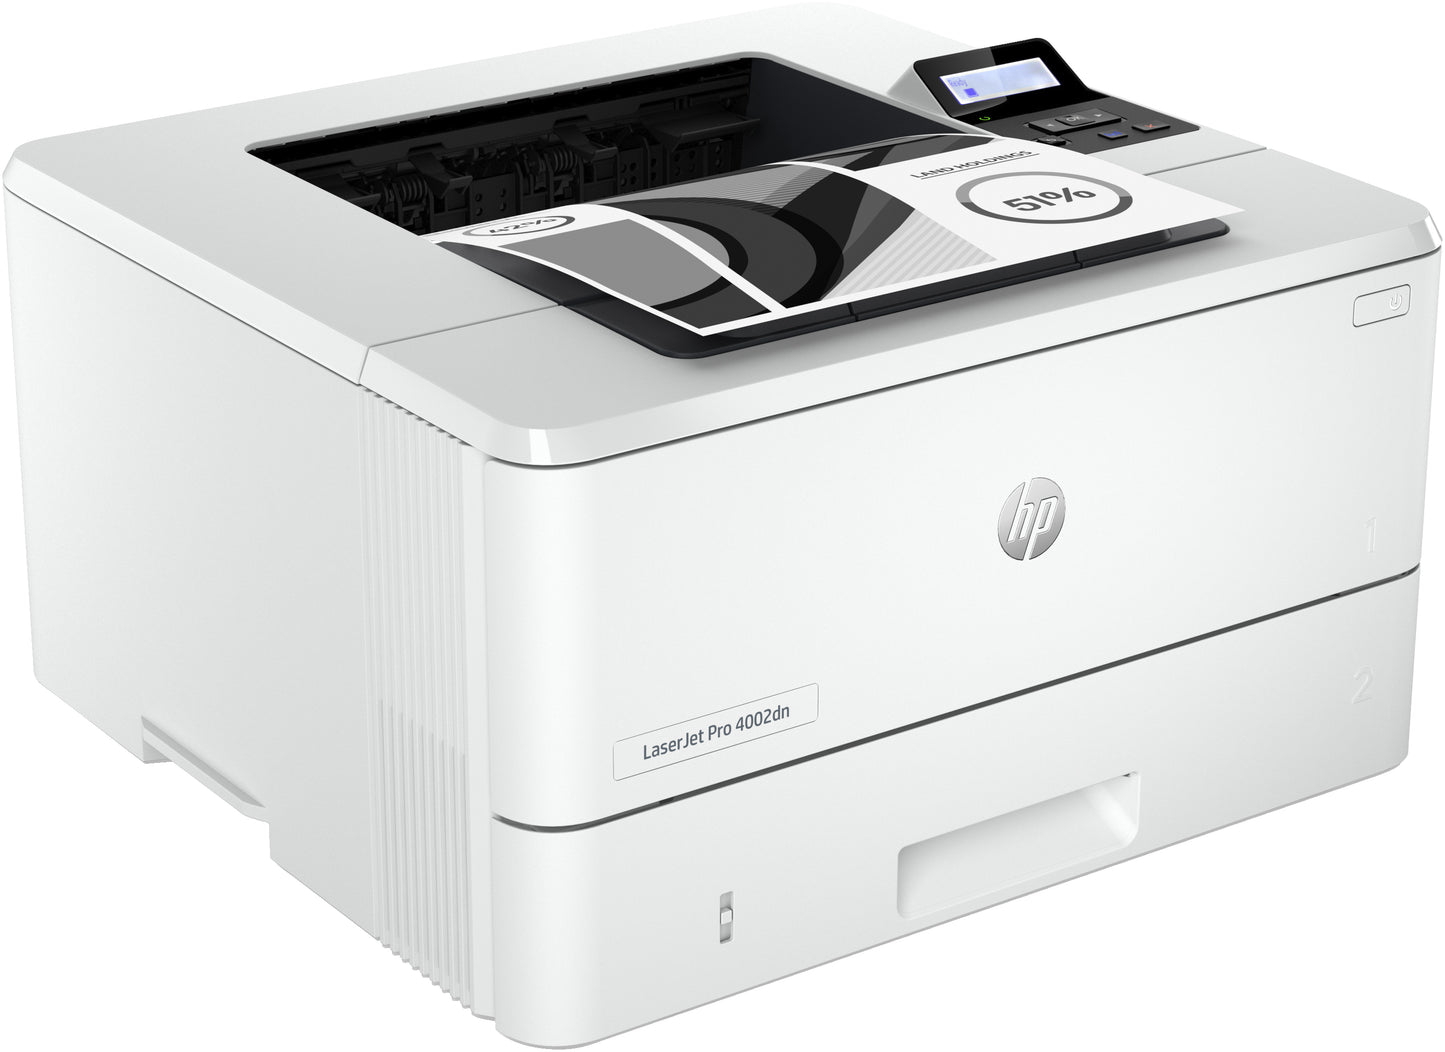 HP LaserJet Pro 4002dn Printer Black and white Printer for Small medium business Print Two-sided printing; Fast first page out speeds; Energy Efficient; Compact Size; Strong Security